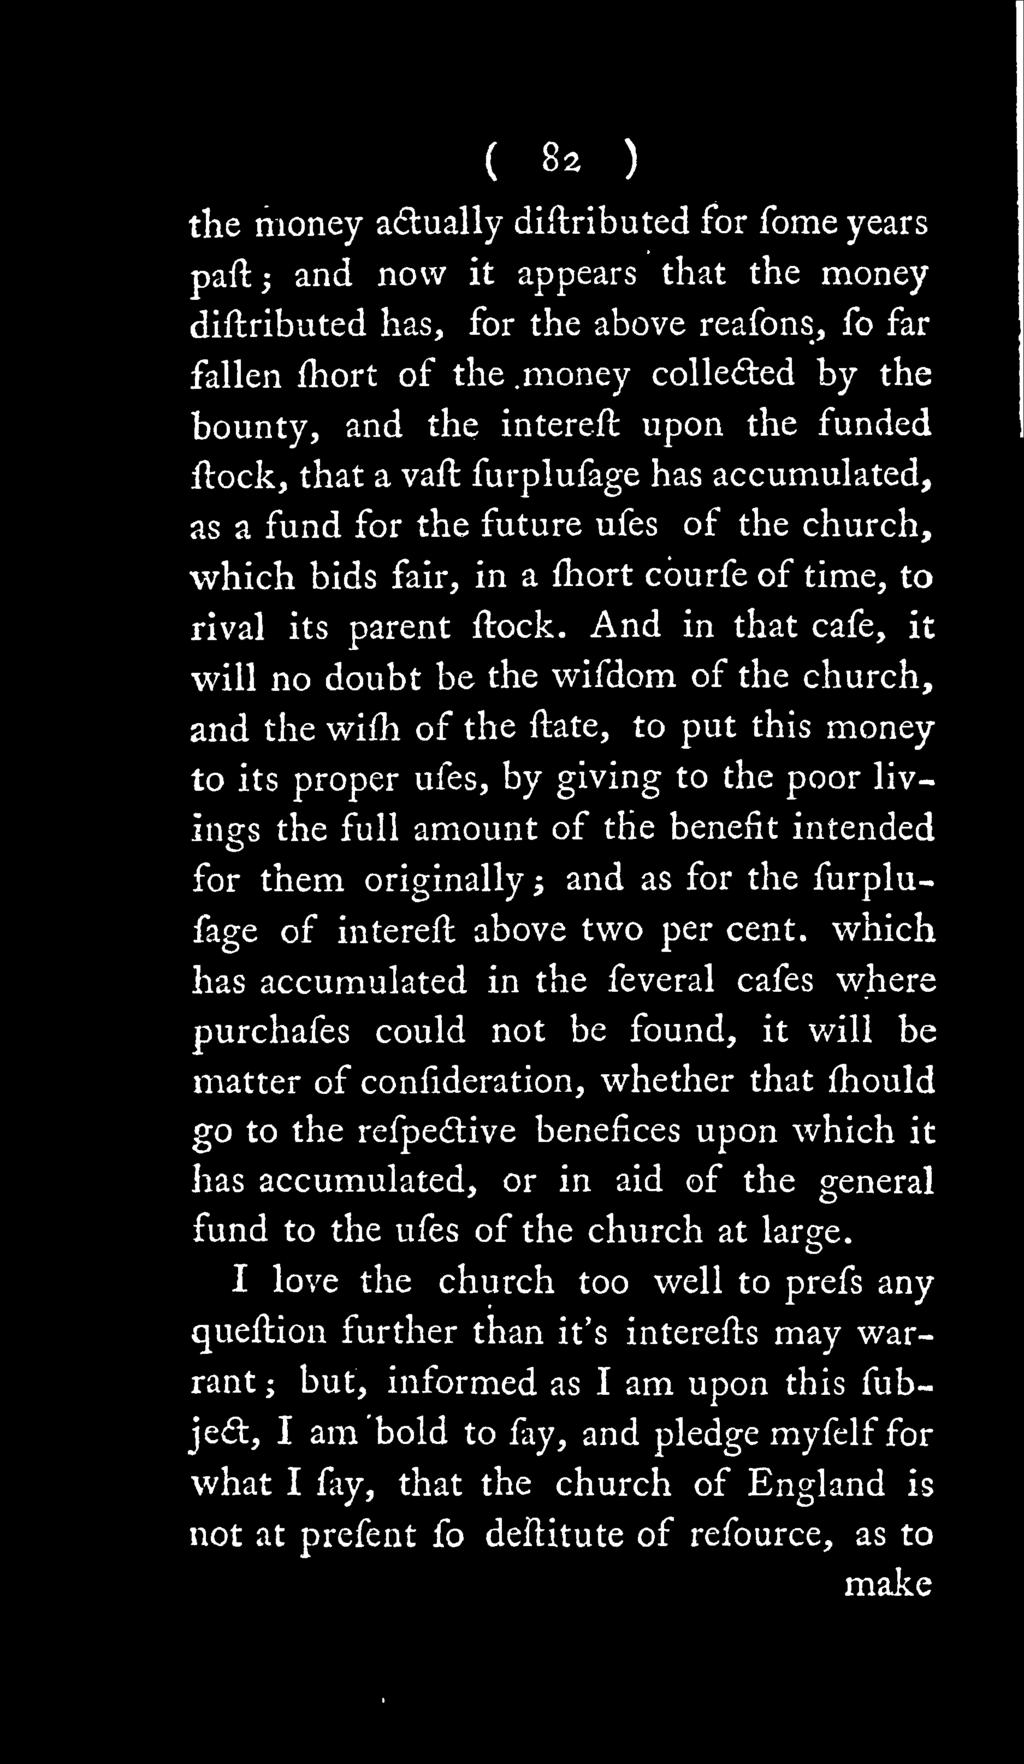 And in that cafe, it will no doubt be the wifdom of the church, and the wifh of the flate, to put this money to its proper ufes, by giving to the poor livings the full amount of the benefit intended